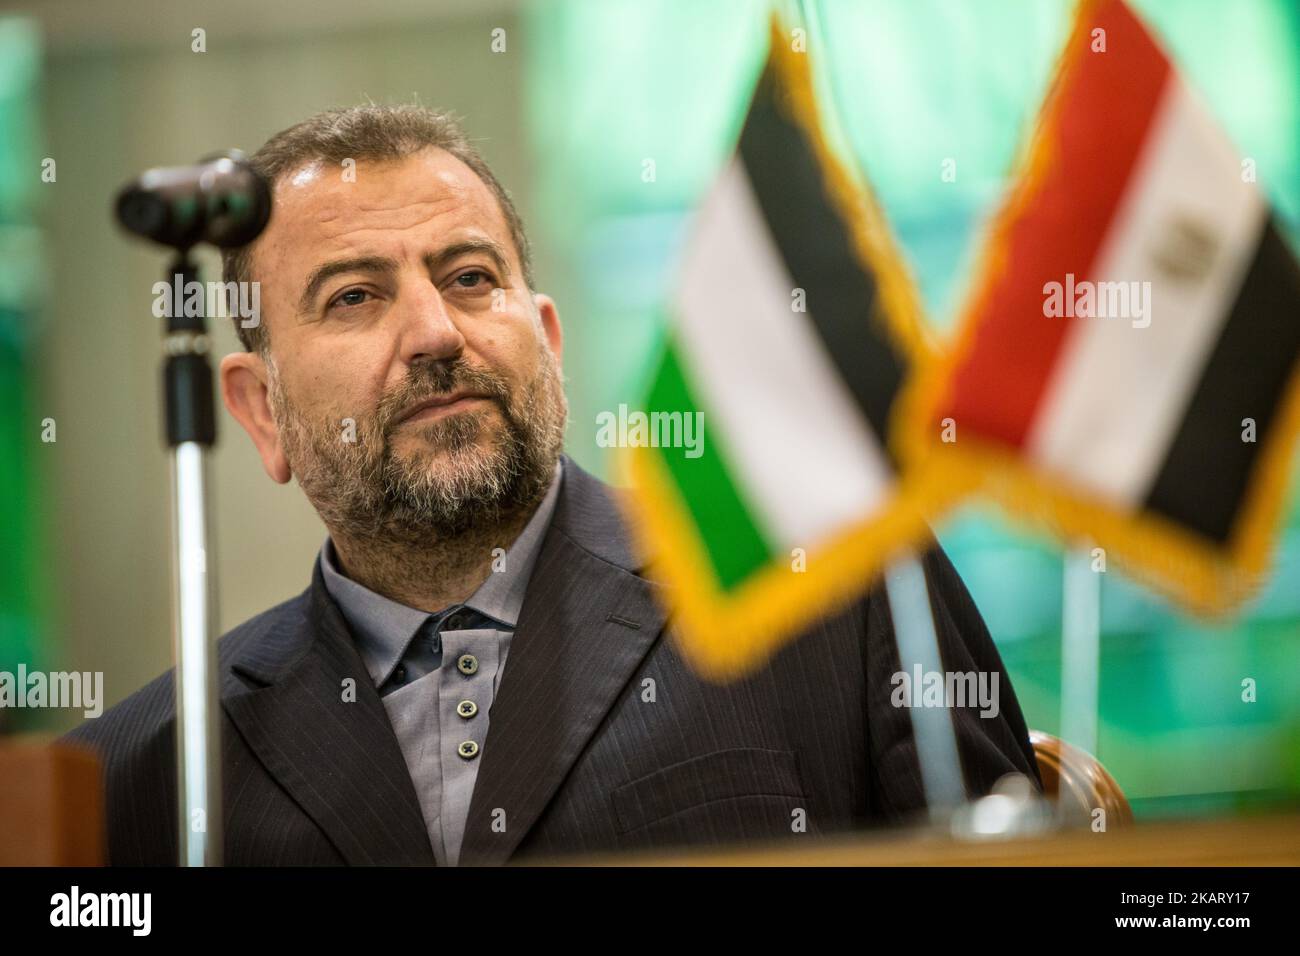 Hamas's new deputy leader Salah al-Aruri is pictured during the signing of a reconciliation deal between the Islamic Resistence Movement (Hamas) and Fatah in Cairo, Egypt on October 12, 2017, as the two rival Palestinian movements ended their decade-long split following negotiations overseen by Egypt. Under the agreement, the West Bank-based Palestinian Authority is to resume full control of the Hamas-controlled Gaza Strip by December 1, according to a statement from Egypt's government. (Photo by Ibrahim Ezzat/NurPhoto) Stock Photo